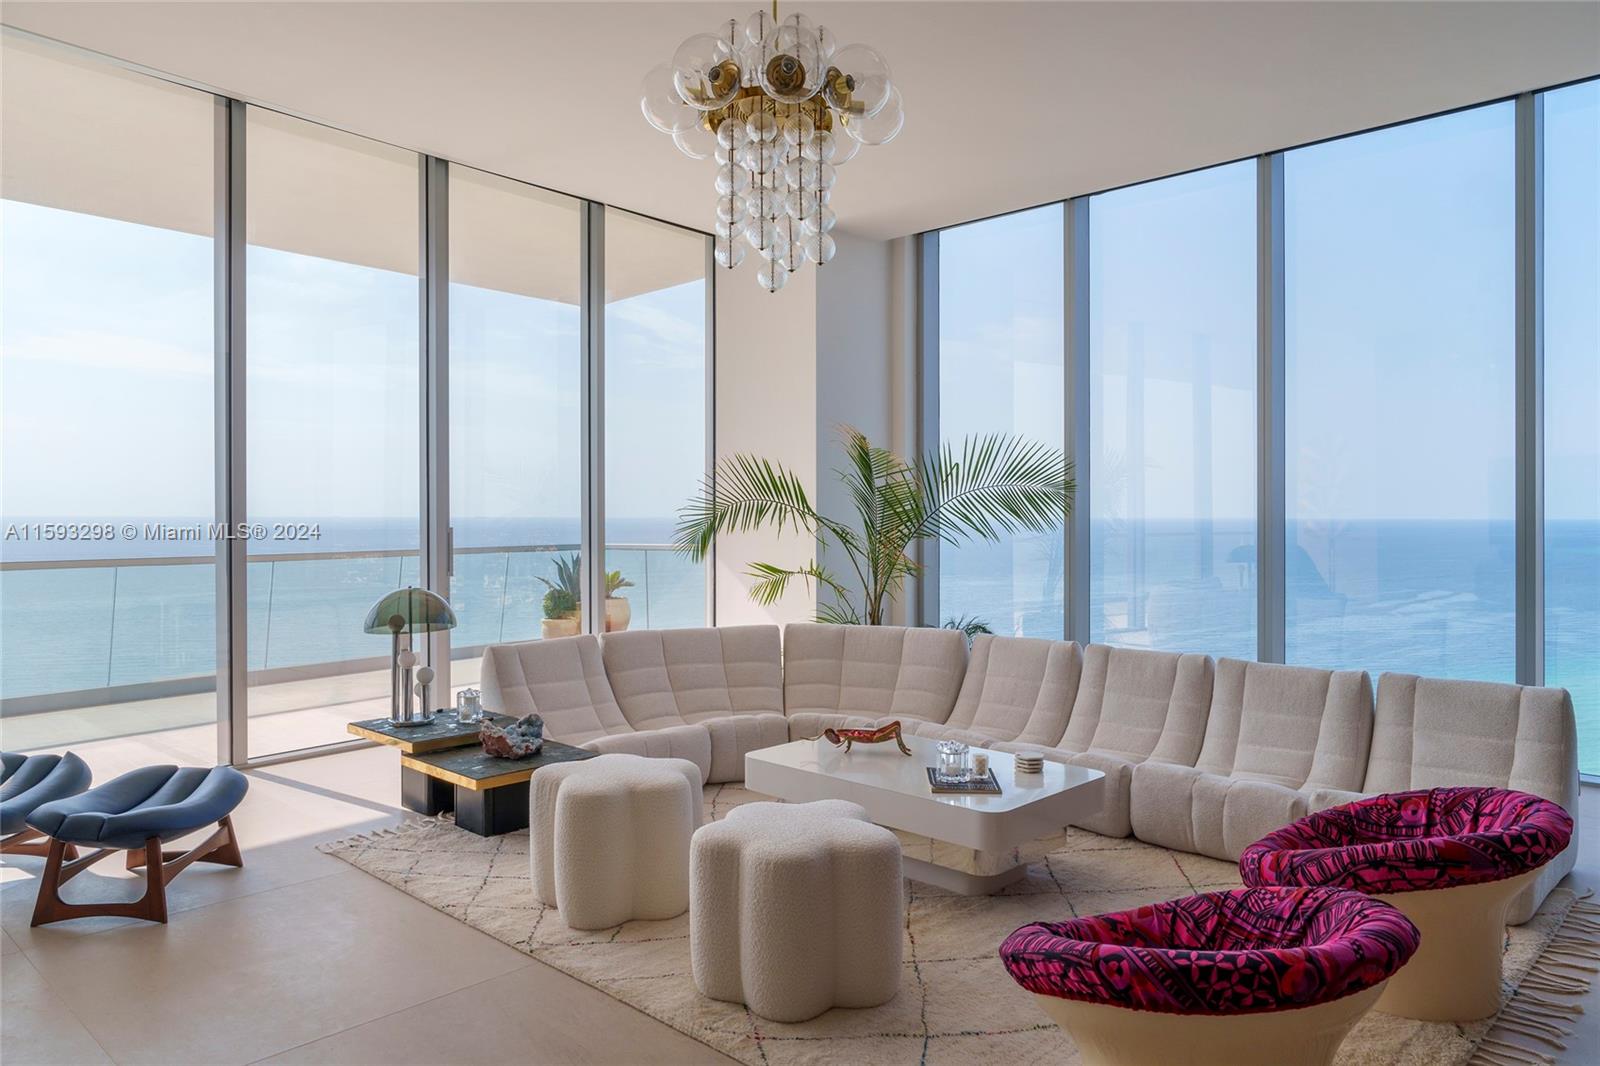 A space where nature, culture & modern architecture collide amidst the untamed allure of Miami. A southeast corner unit on the 42nd floor with sunrise & sunset terraces and unobstructed ocean views - this immaculate unit exudes a coastal vibe featuring stone & oak floors, an open dining area chef’s kitchen and 12-ft ceilings. Designed with both function & style in mind, the kitchen offers custom jade countertops and Snaidero cabinetry, Miele, Viking & True appliances. The light-filled space wrapped in glass accesses the oceanside terrace for indooroutdoor living. A secluded principal suite provides an ocean-view escape, custom walk-in closets & spa bathroom. 3 additional bedrooms & en-suite bathrooms offer a private respite to enjoy peaceful bayside terraces.